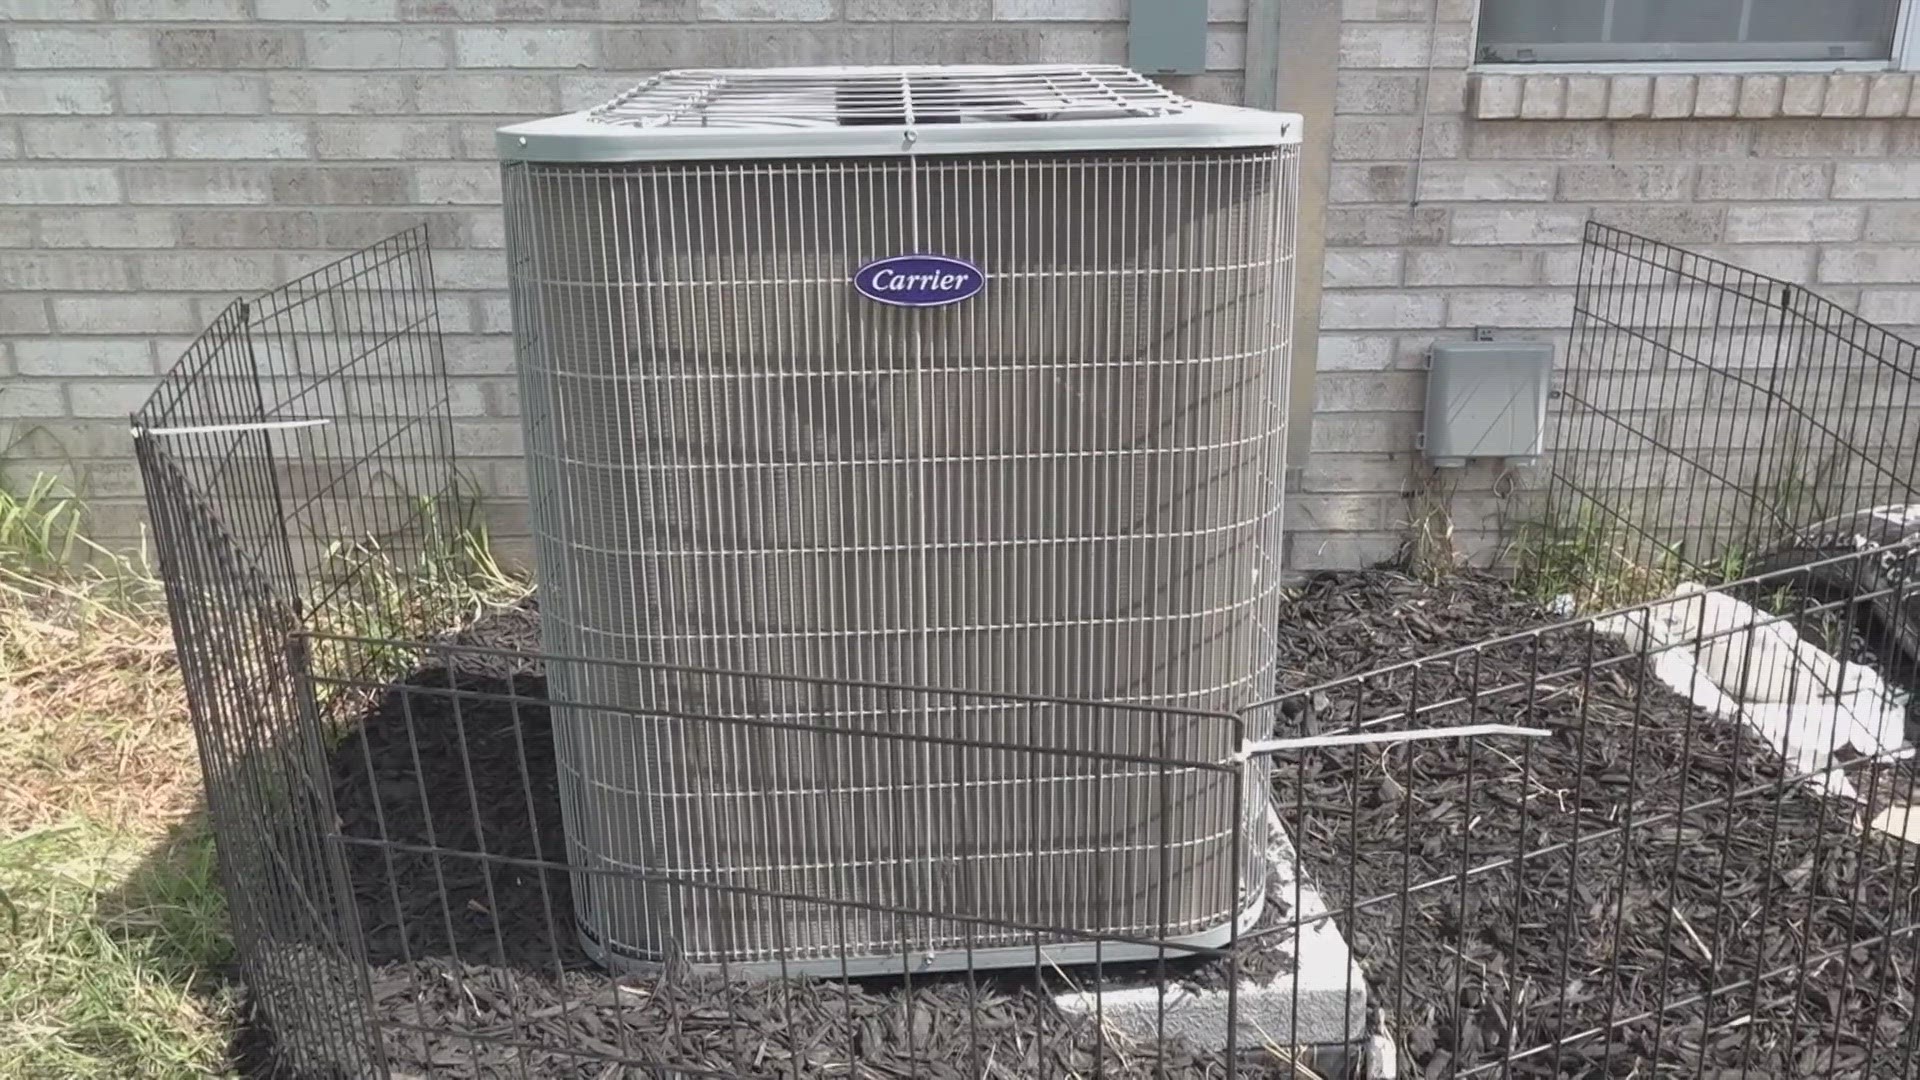 The couple bought the A/C unit for family members, but it has since stopped working.